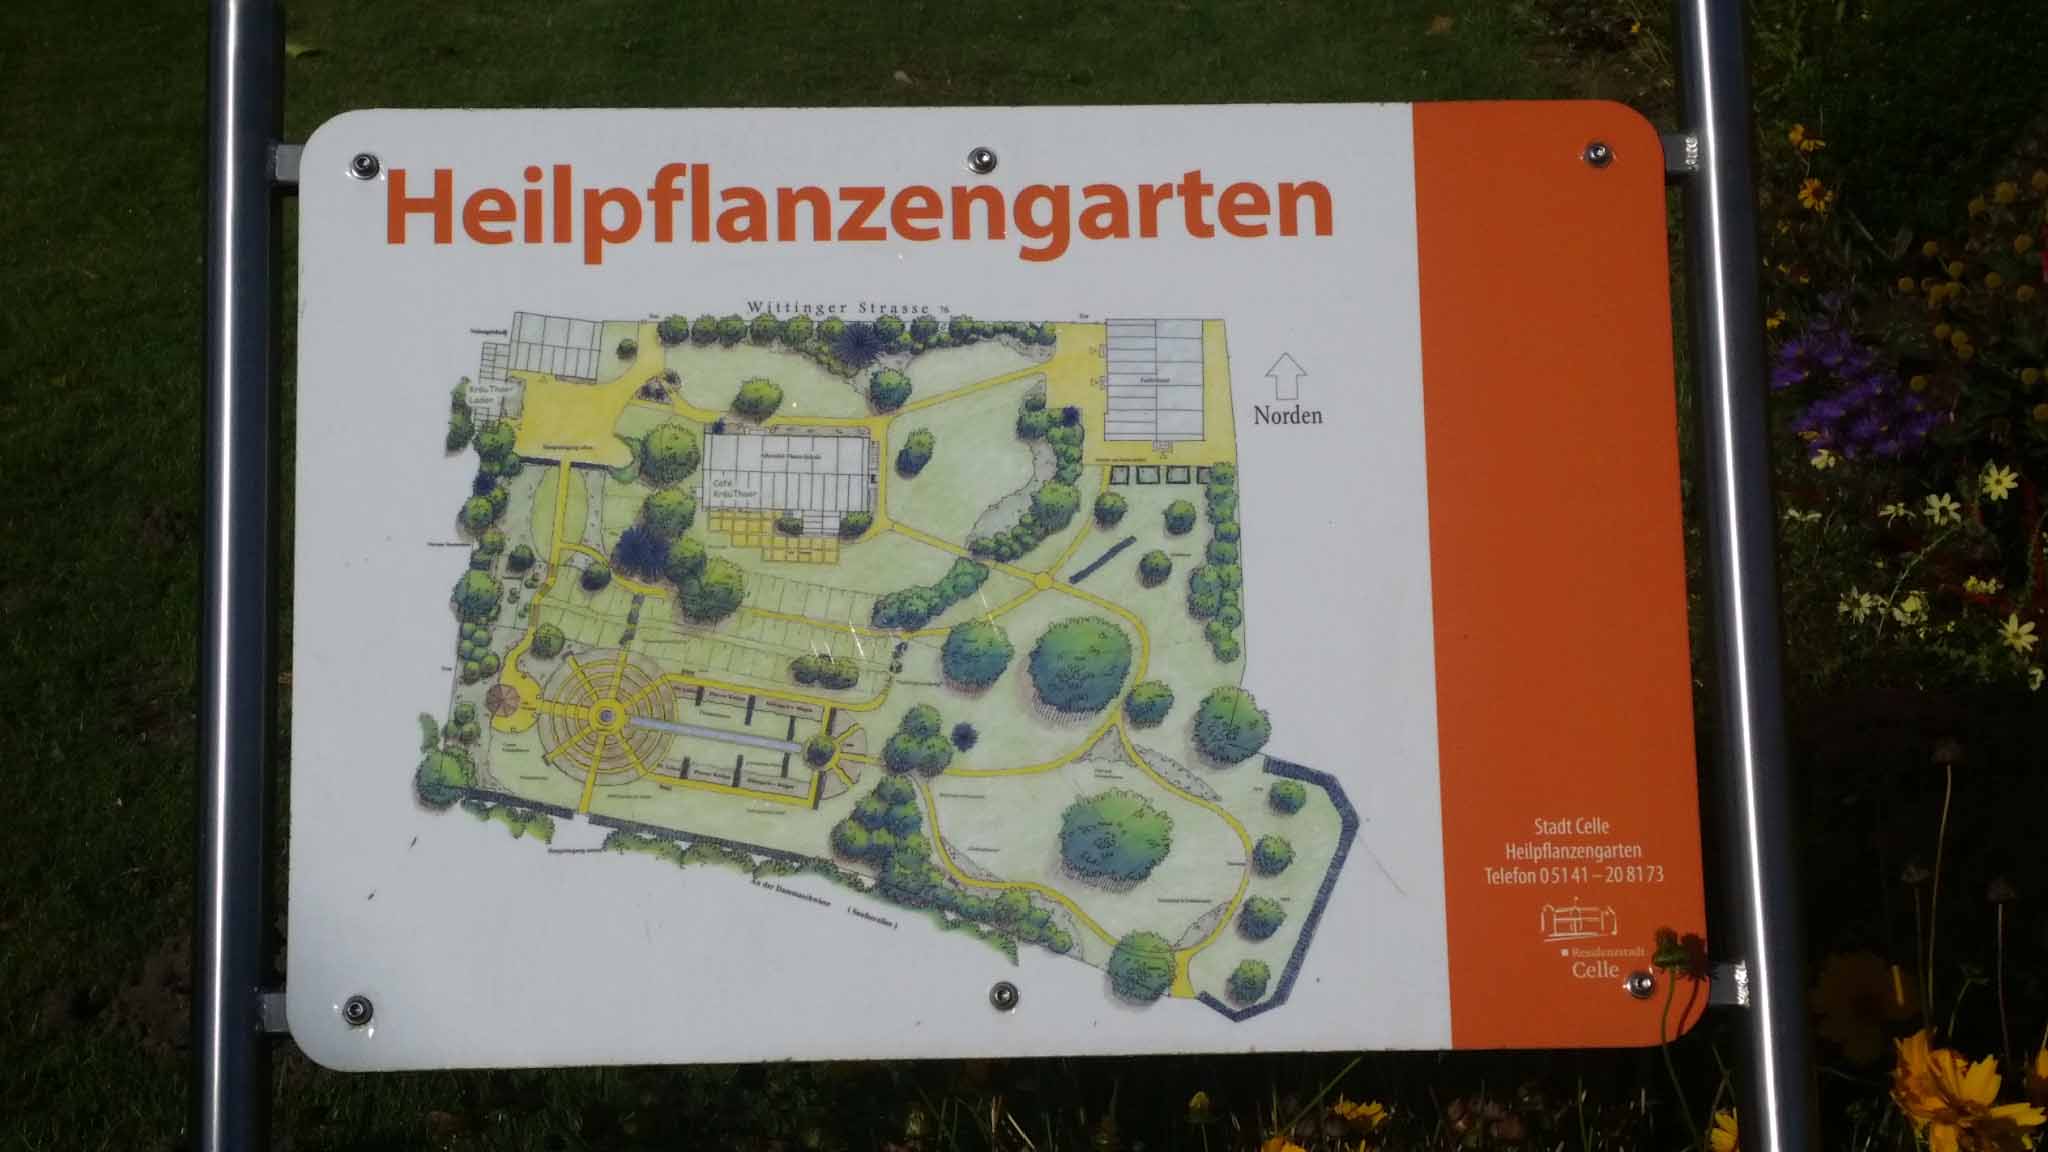 Map of the healing herbs garden in Celle